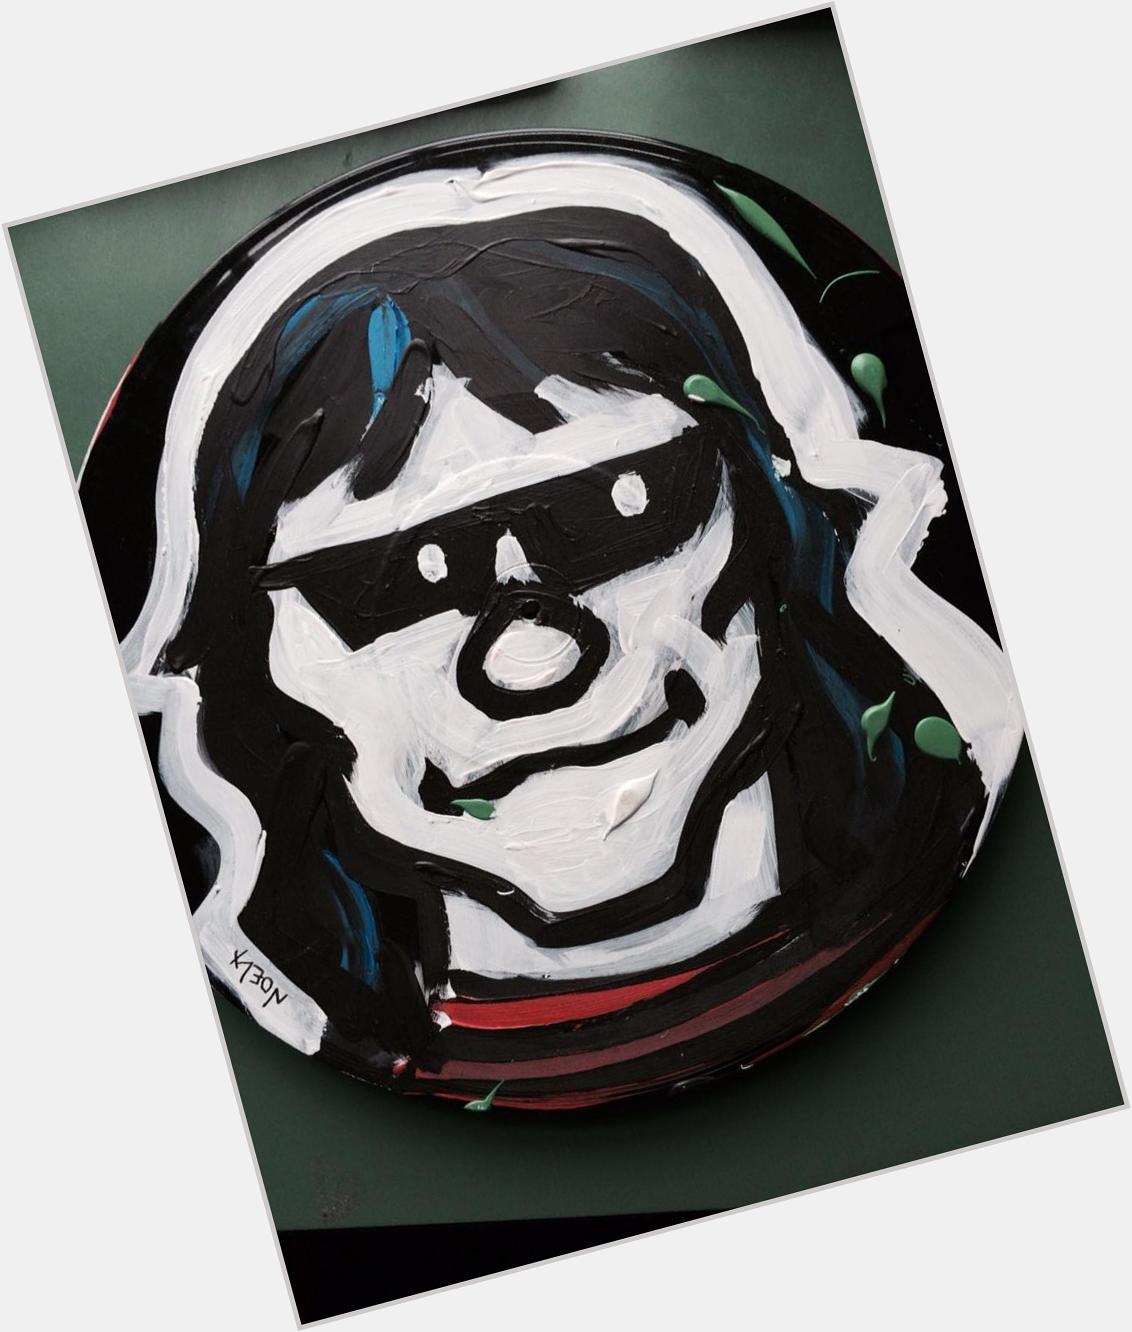 Happy birthday to Tommy Ramone! He\s probably having a PunkRock birthday mashup in the sky. Art by 